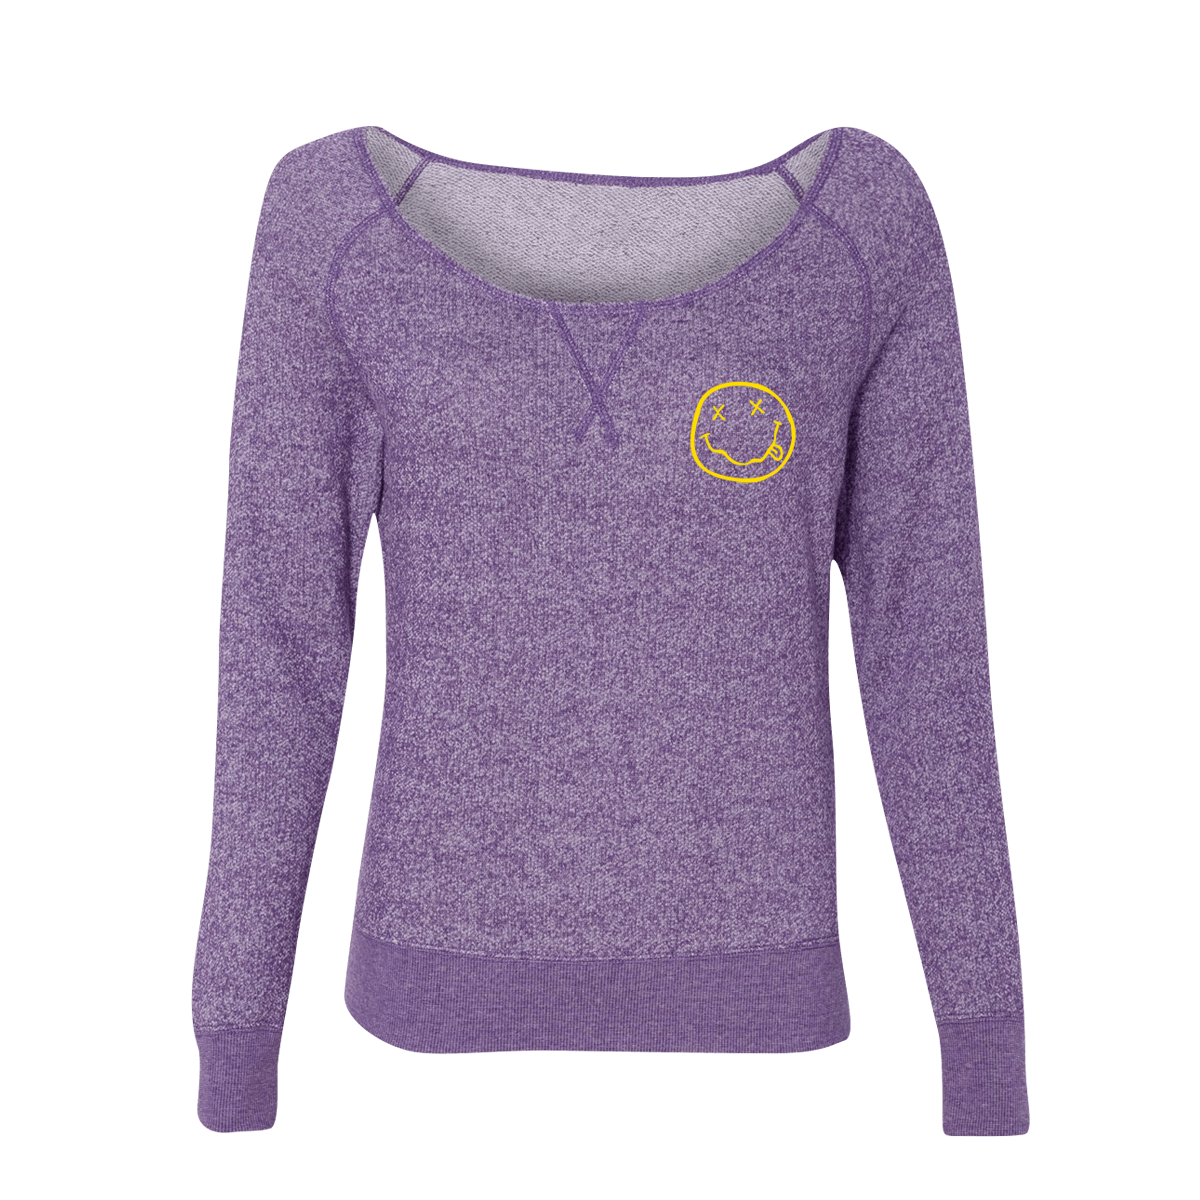 Smiley Off The Shoulder Sweater (Purple) NR0610 XS Official woman Merch